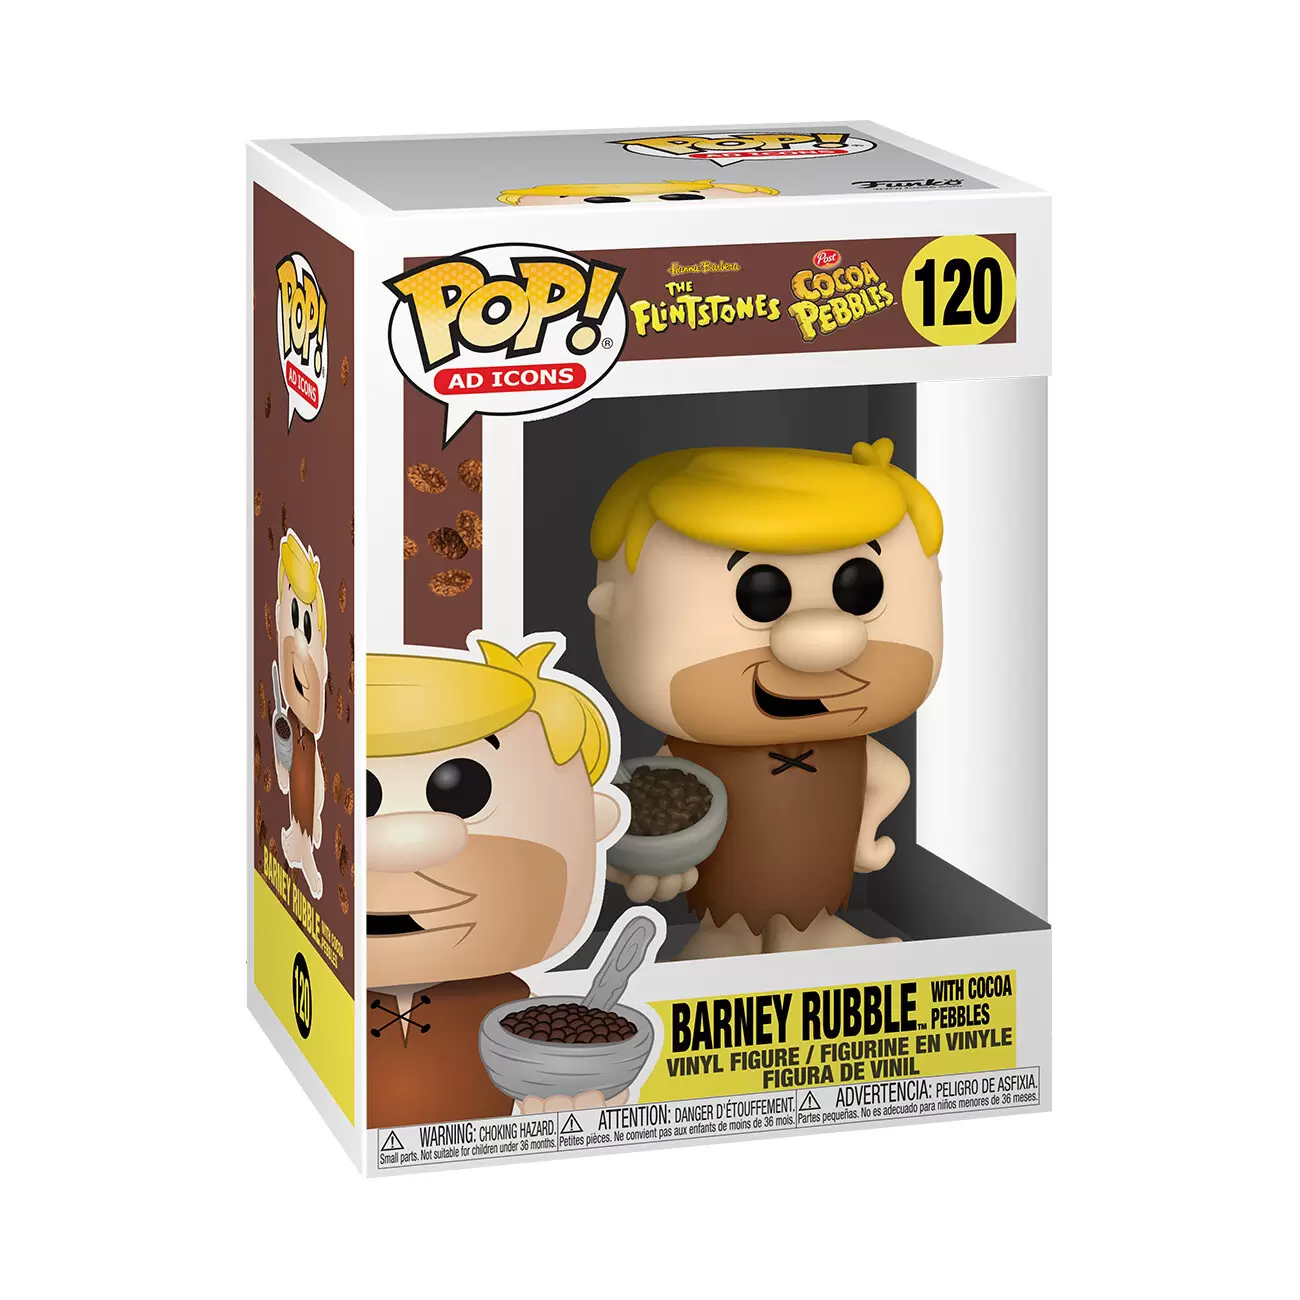 POP! Ad Icons - The Flintstones - Barney Rubble with Cocoa Pebbles